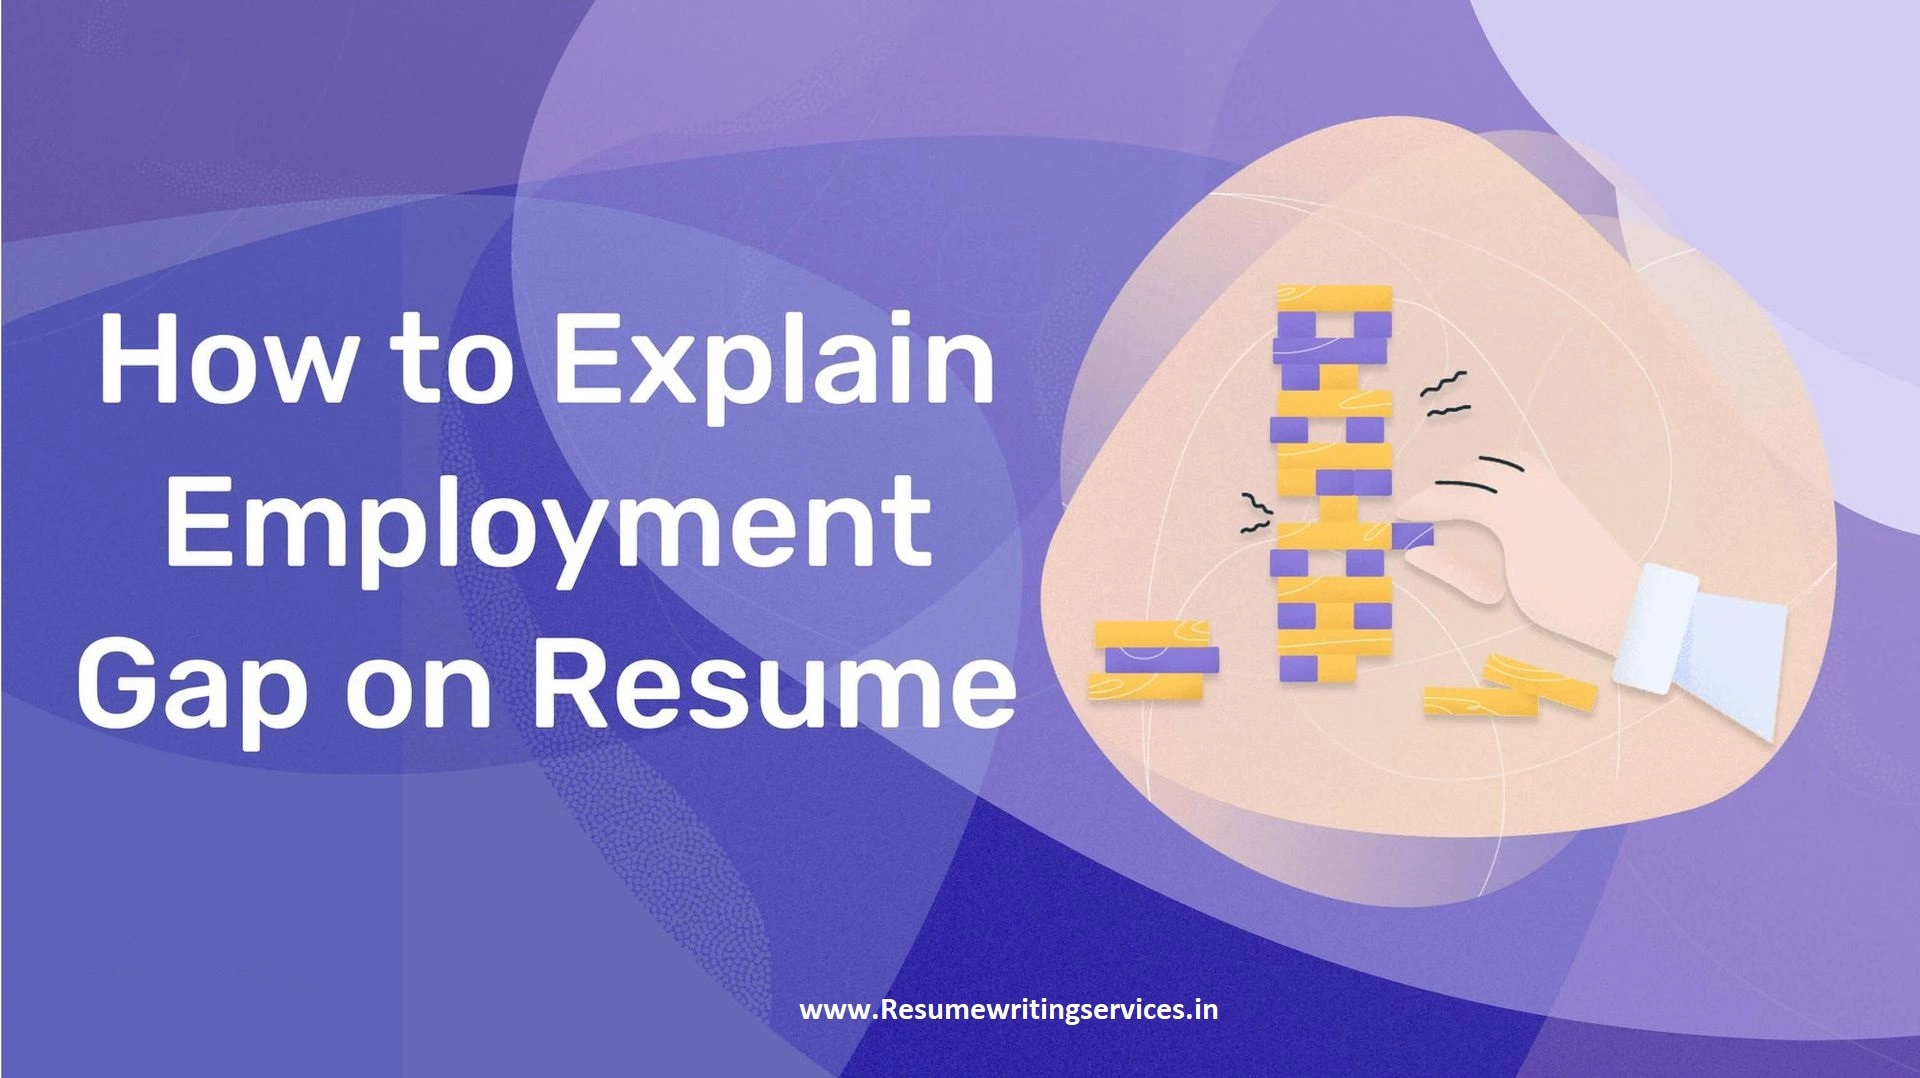 Overcoming Employment Gaps: Expert Advice on Addressing Resume Challenges